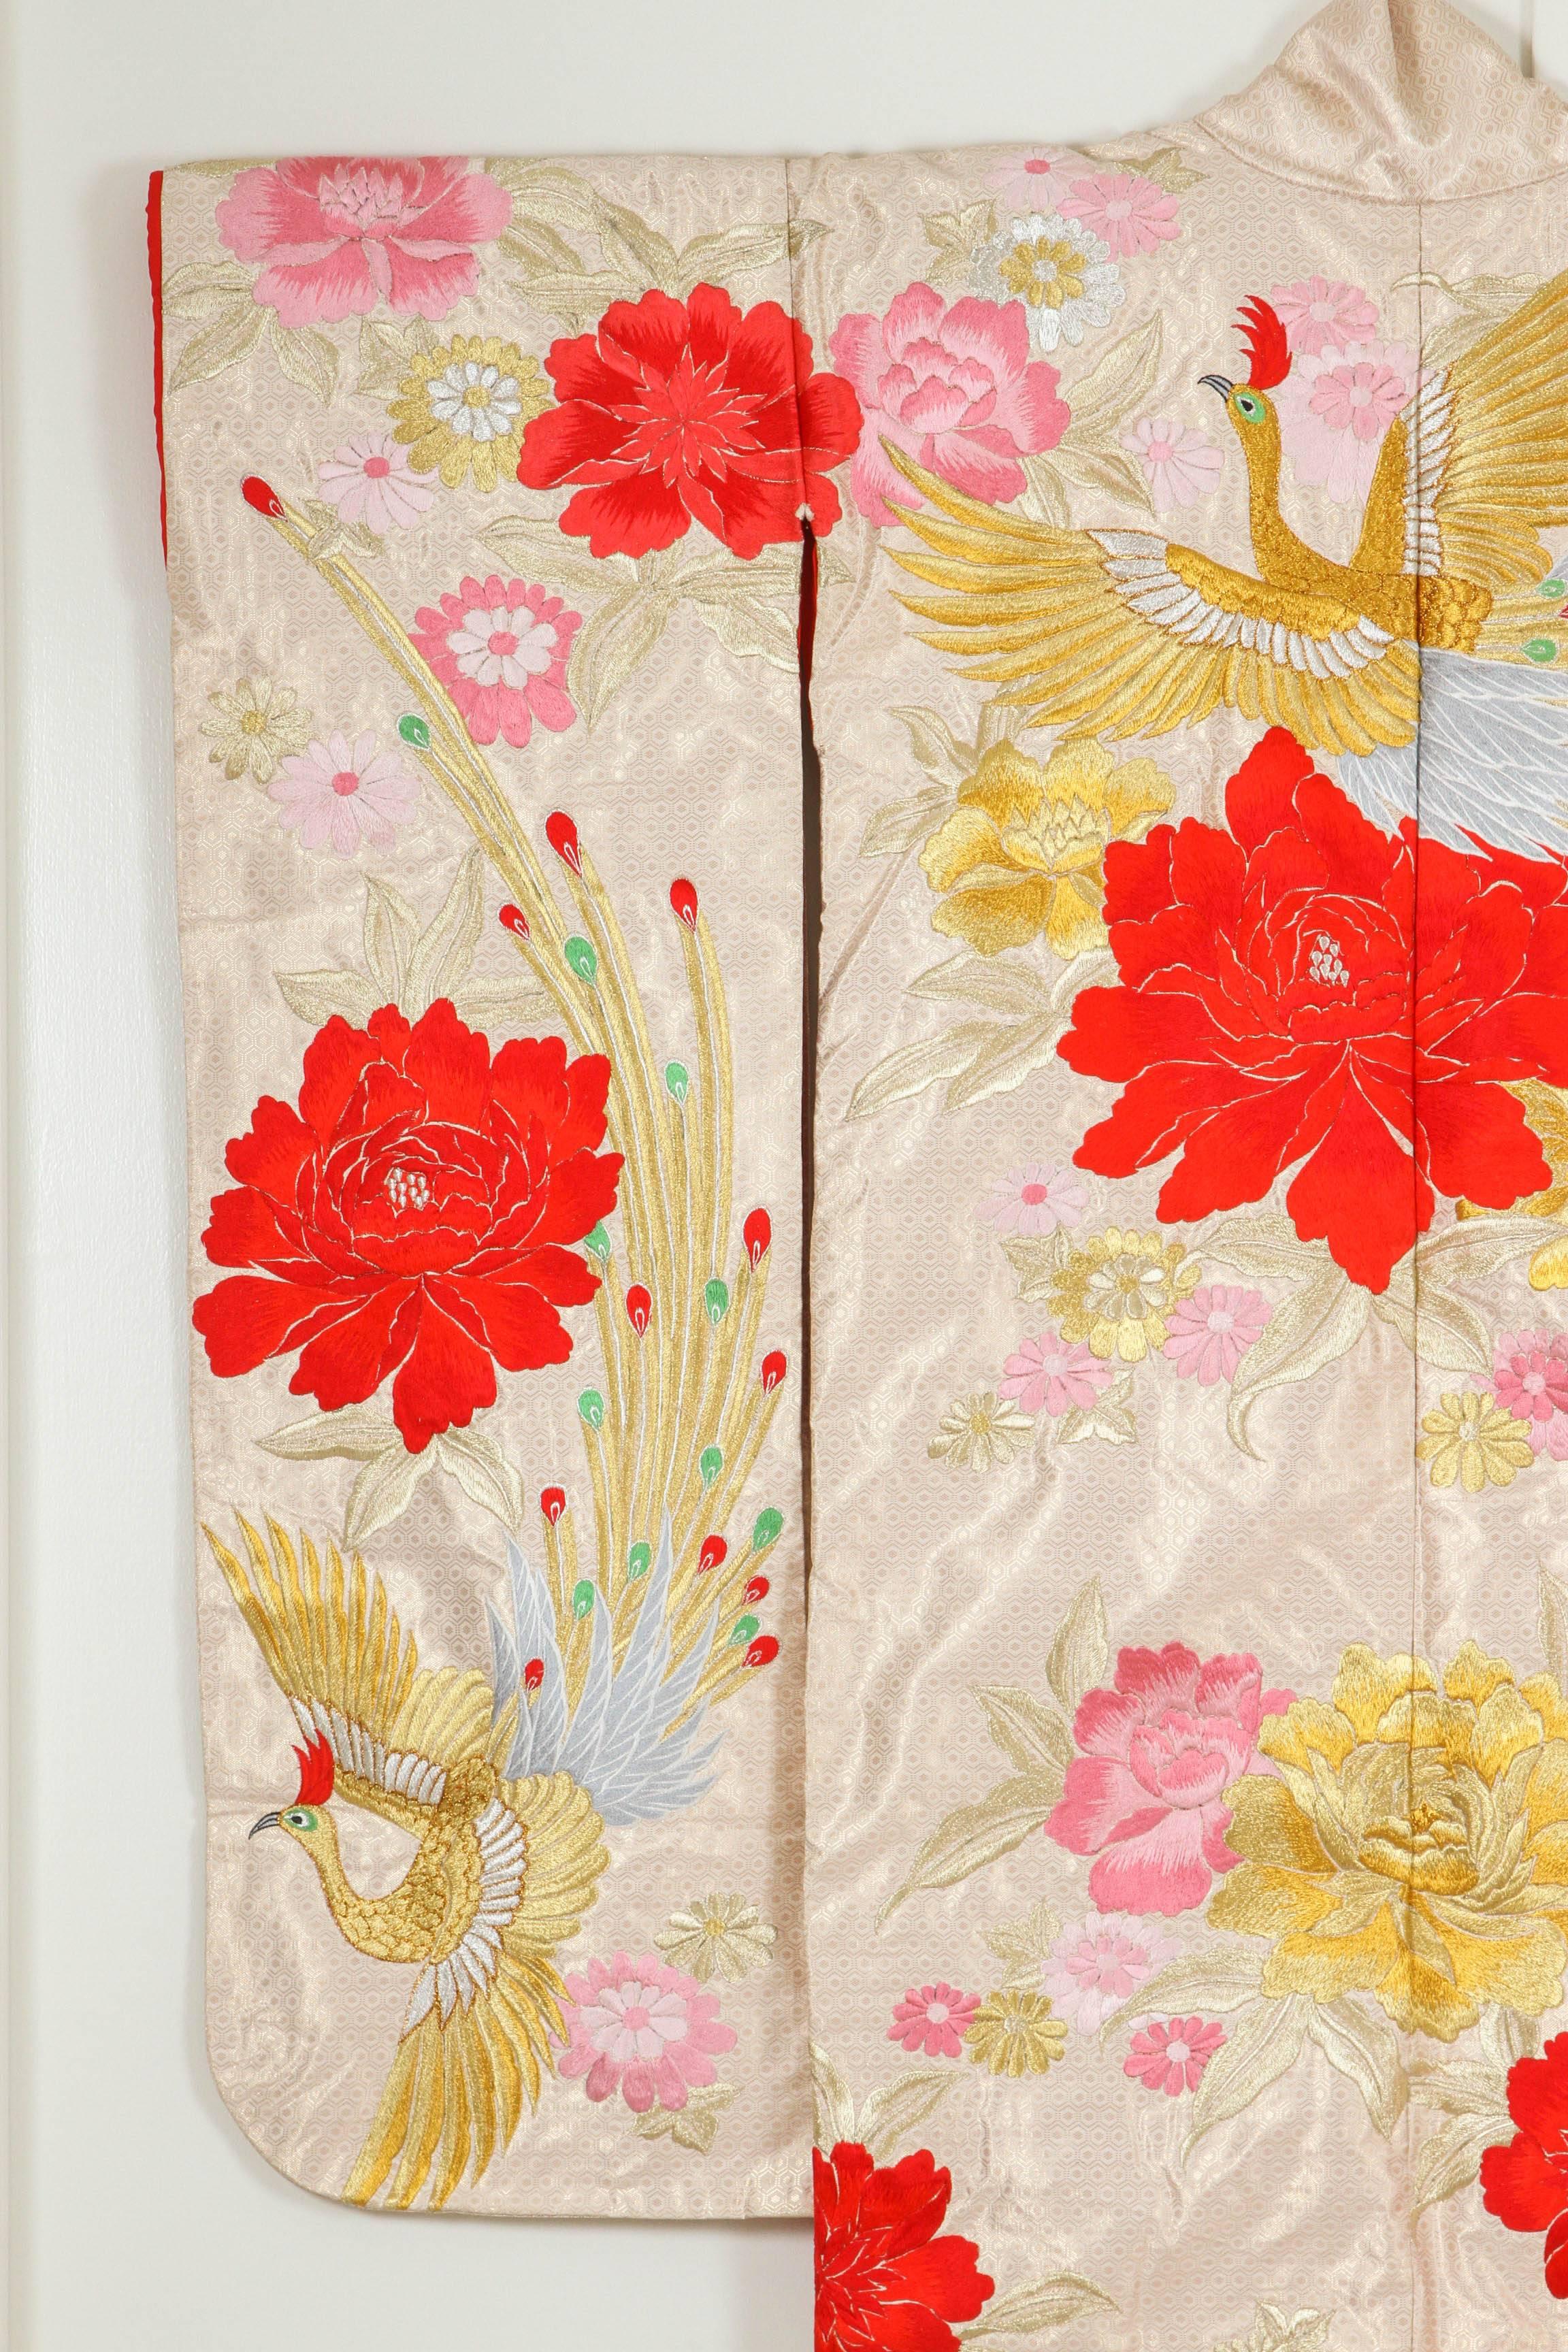 A vintage Mid-Century ivory color silk brocade collectable Japanese ceremonial kimono. One of a kind hand crafted.
Fabulous museum quality ceremonial piece in pure silk with intricate detailed hand-embroidery throughout accented with floral gold